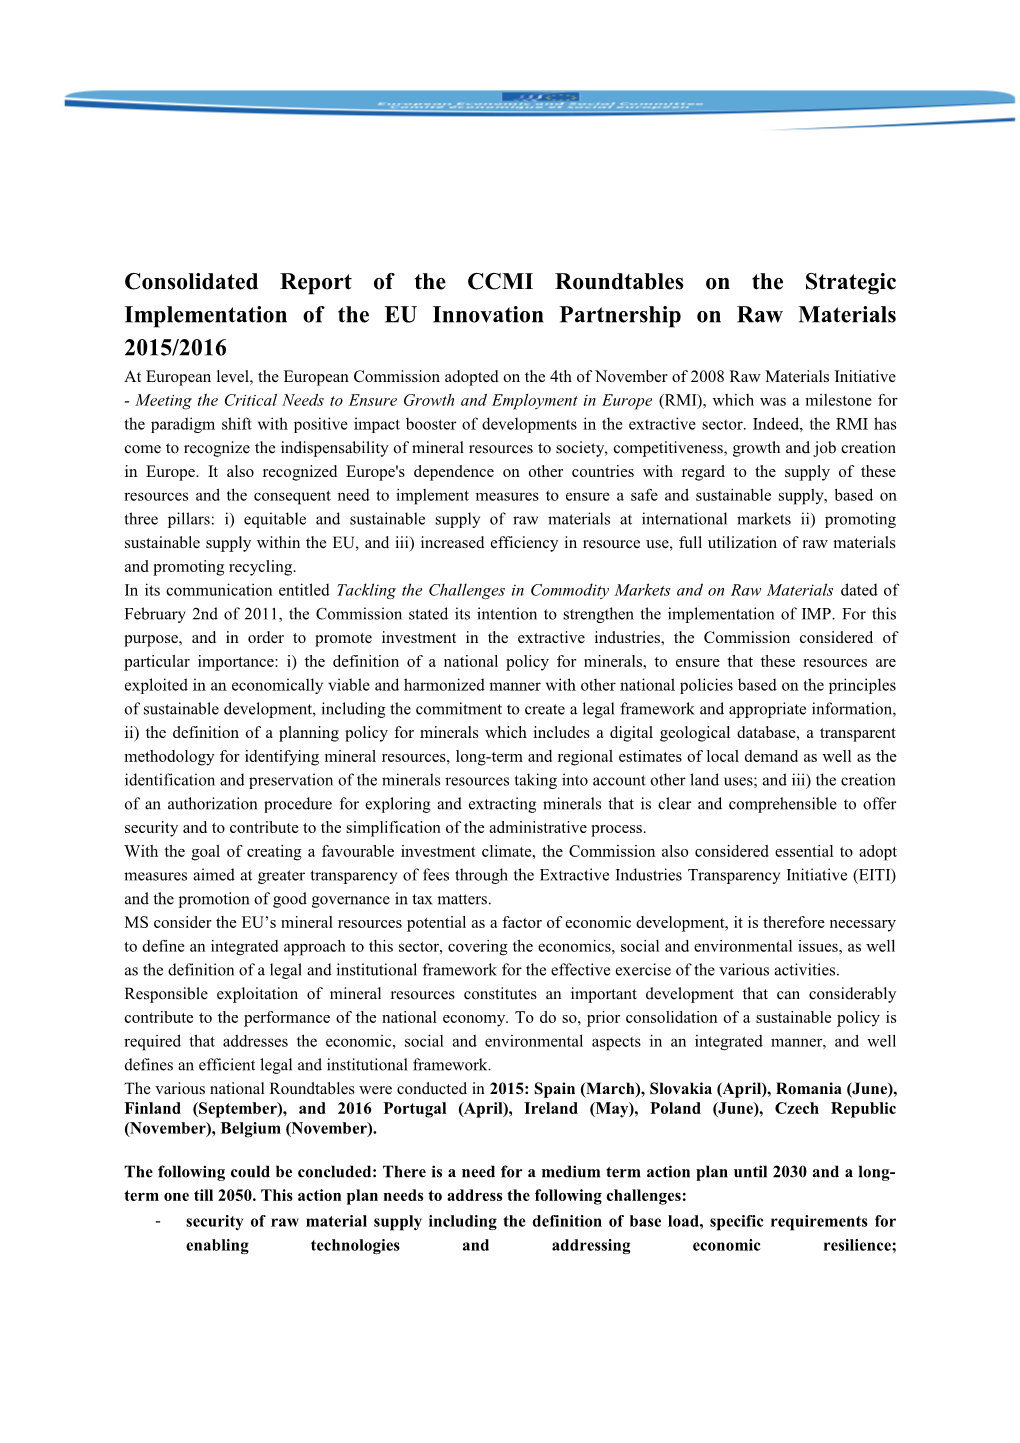 Consolidated Report of the CCMI Roundtables on the Strategic Implementation of the EU